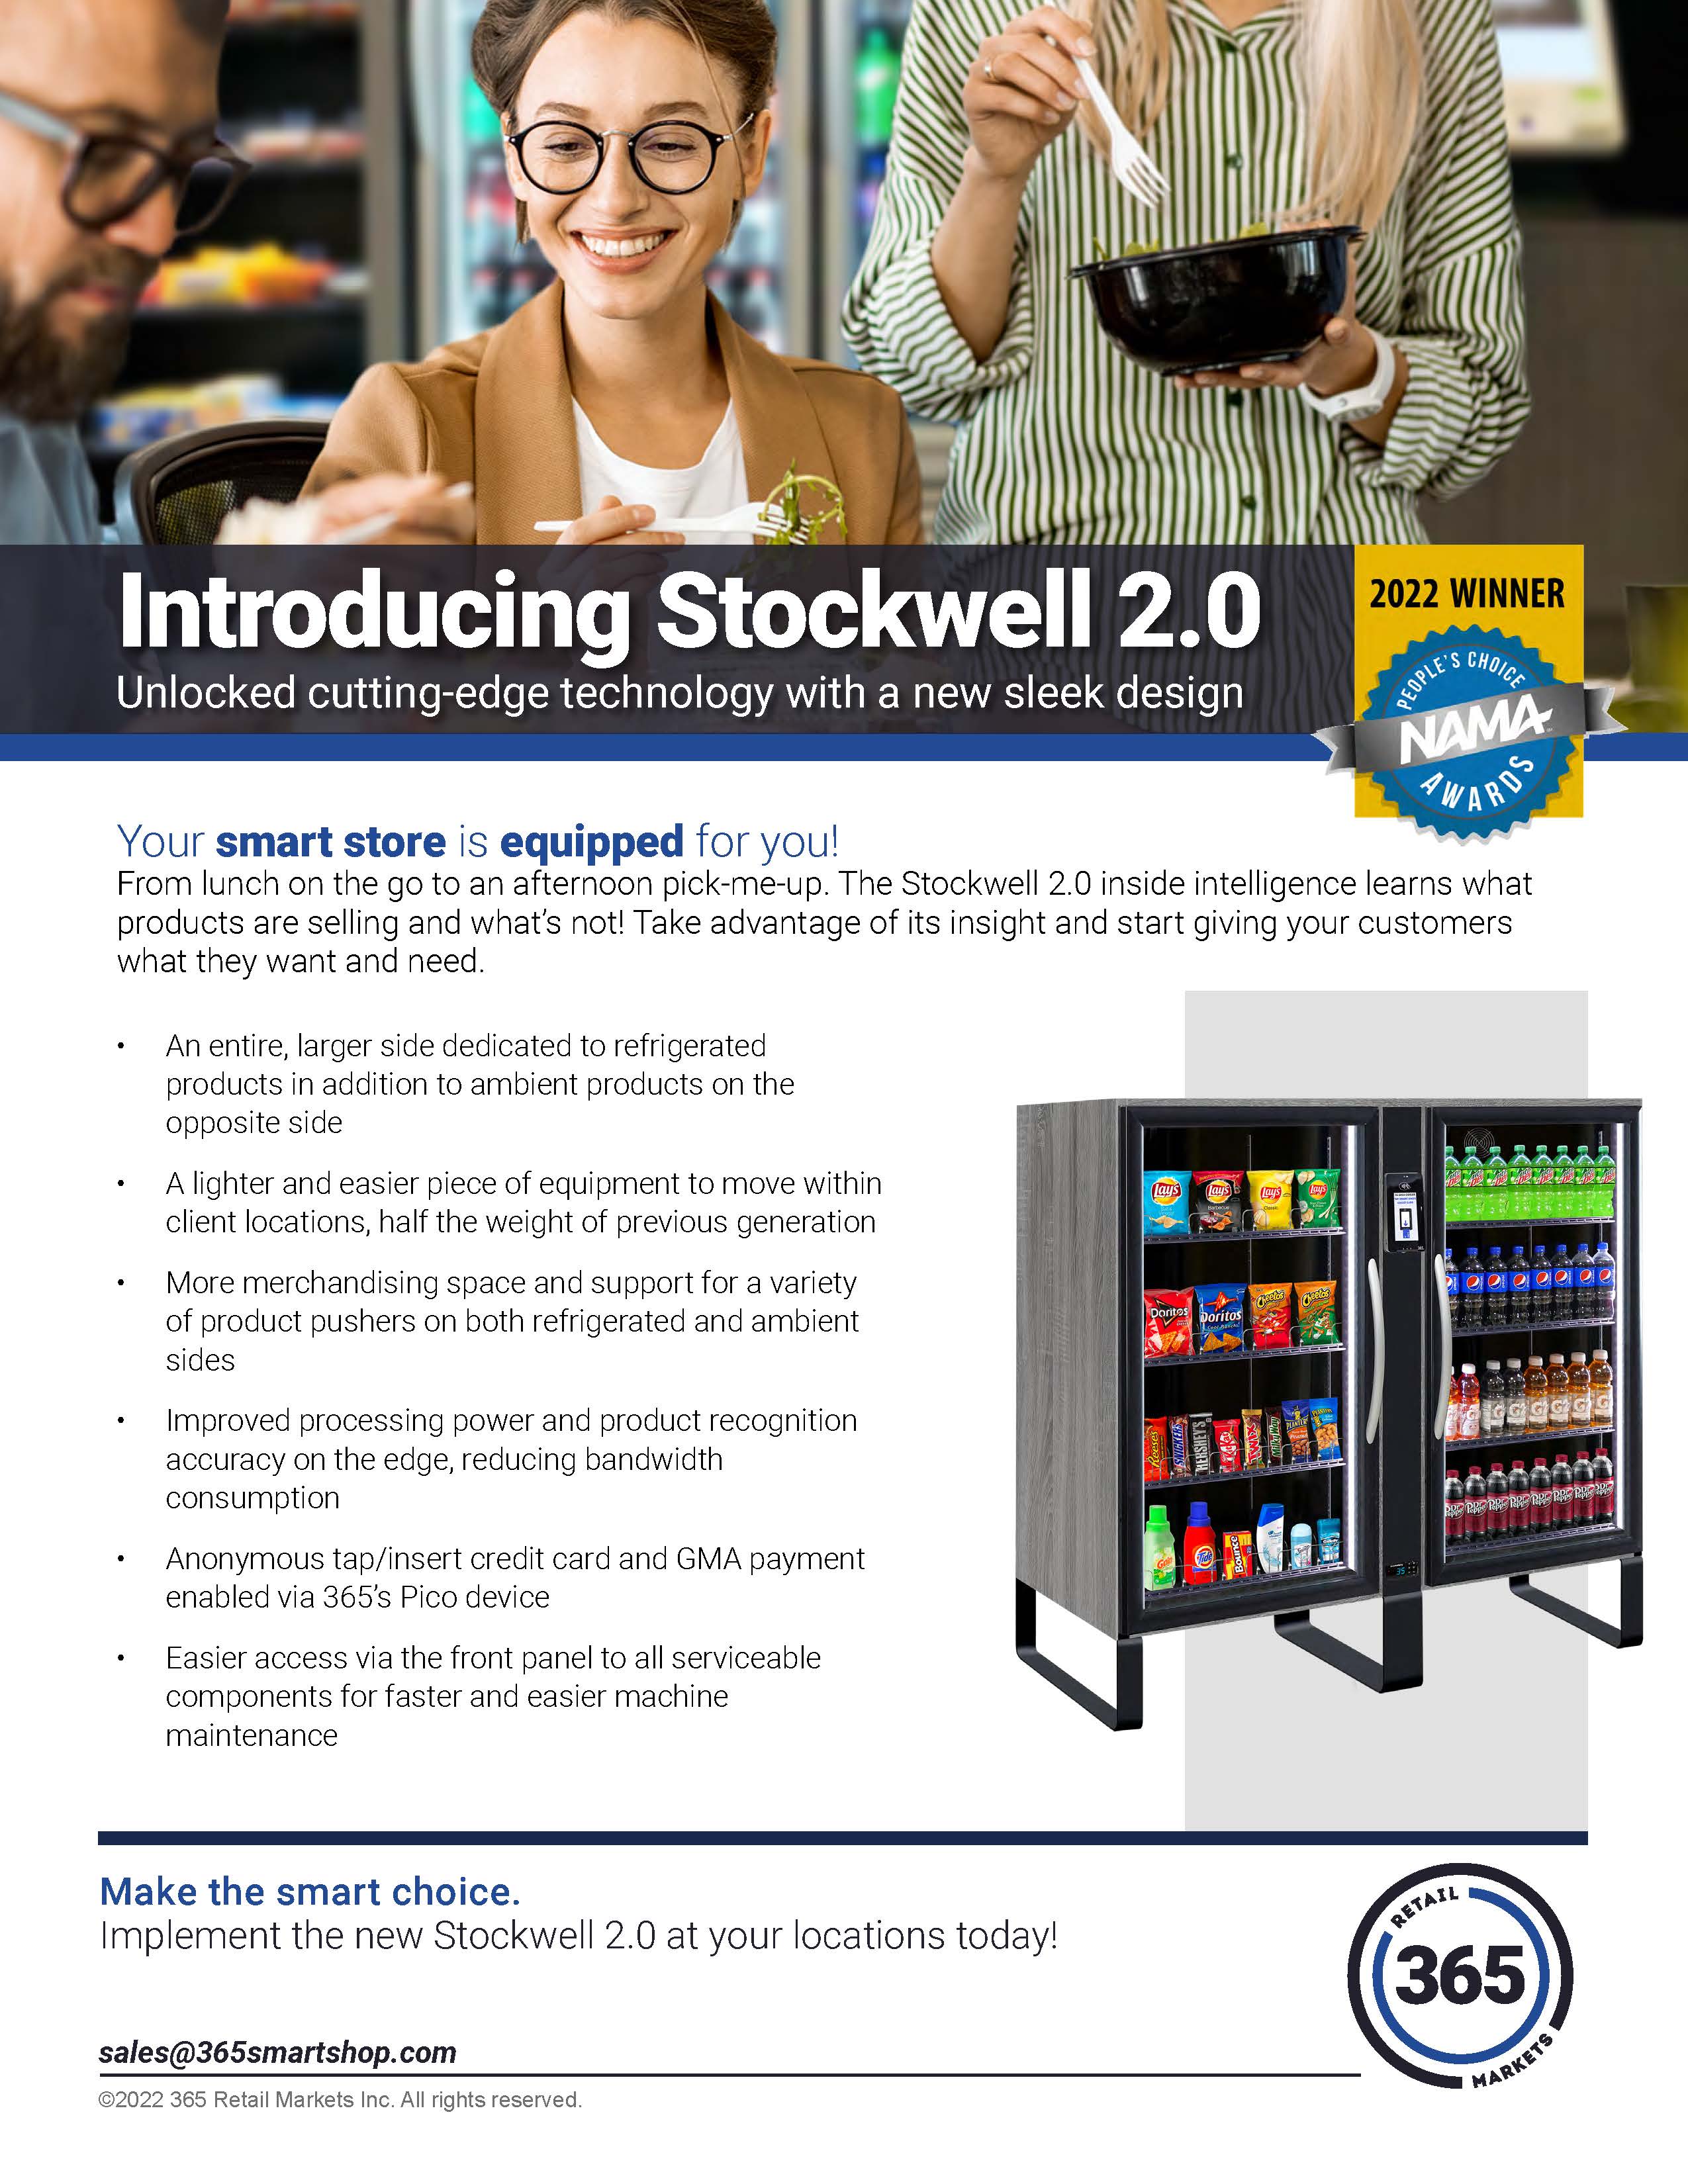 Stockwell2.0-SalesPager.jpg